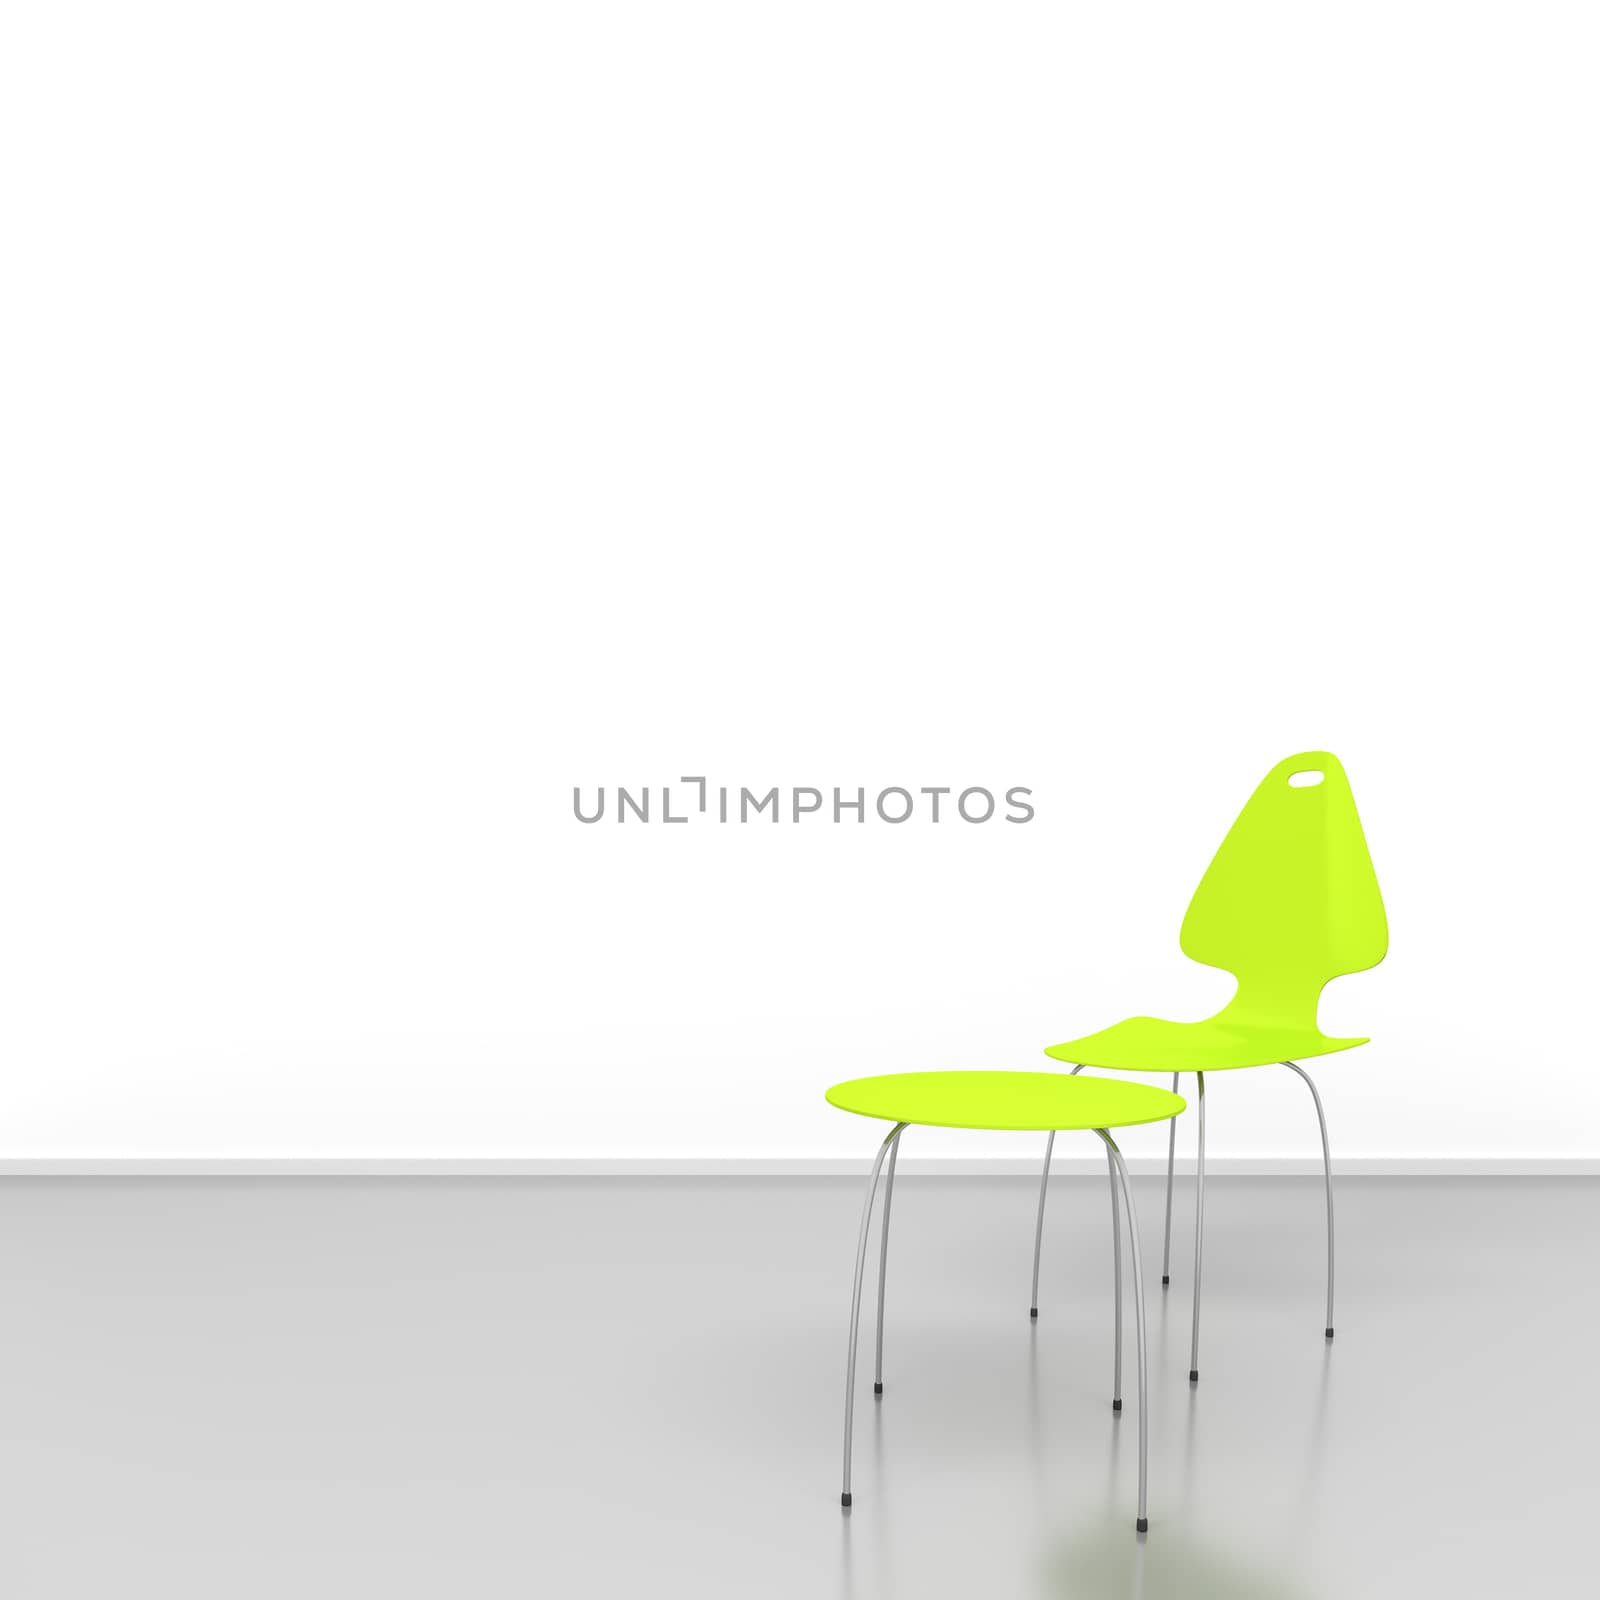 An image of a green chair and a table